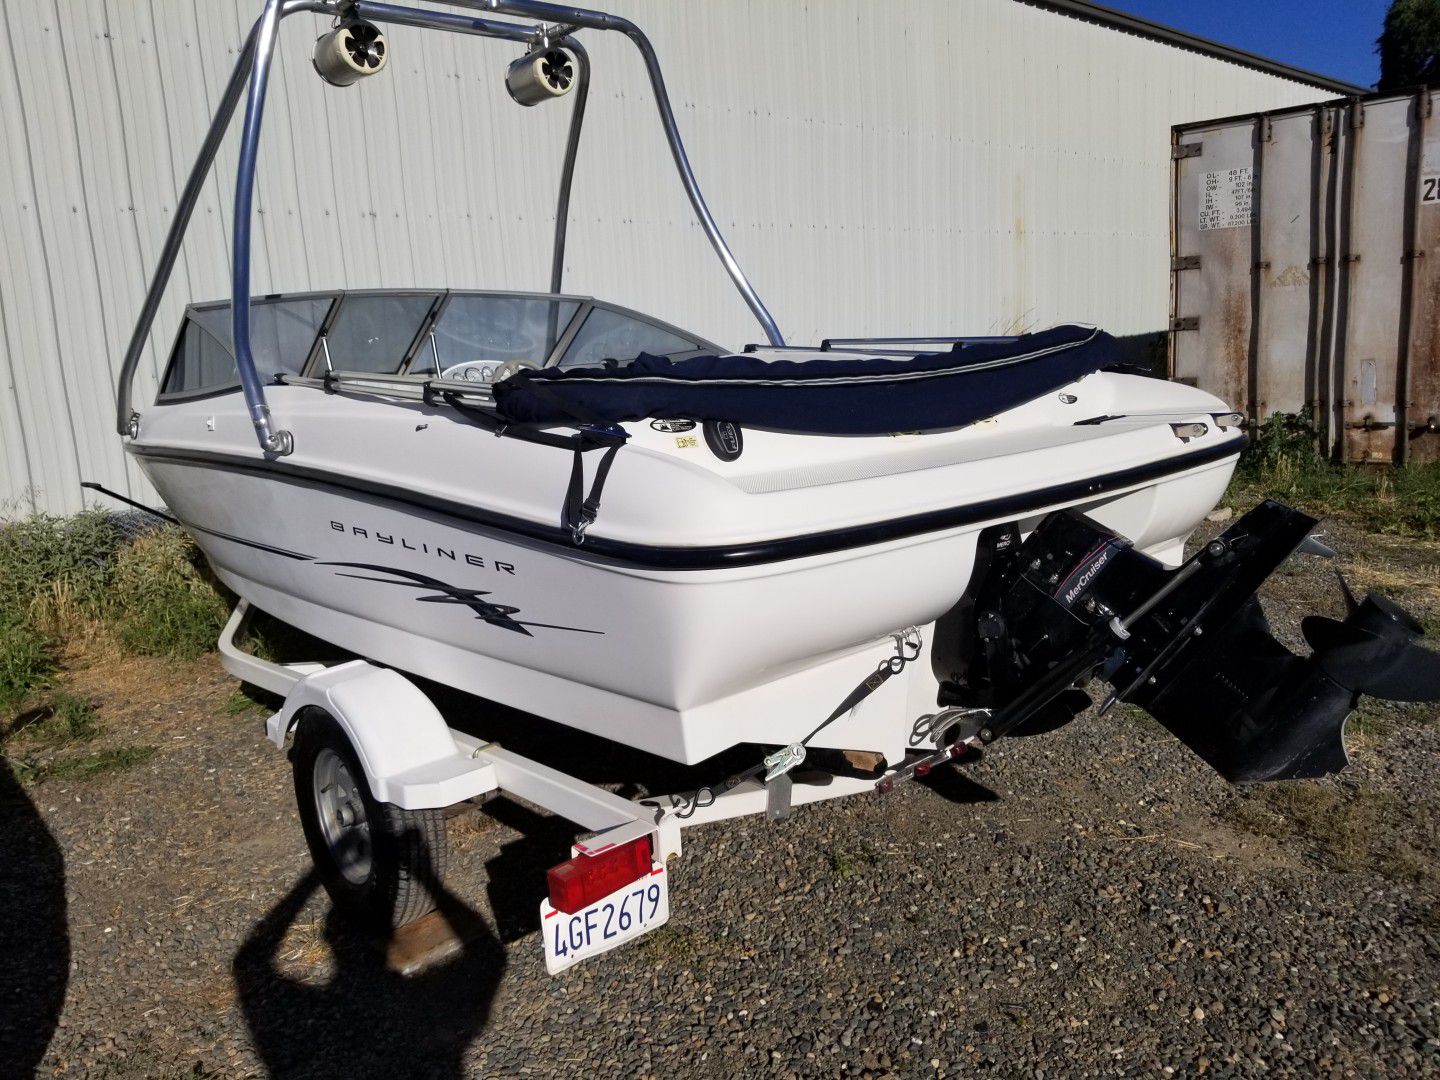 2005 Bayliner 175 boat with wake/ski tower and audio system - refreshed interior - runs excellent